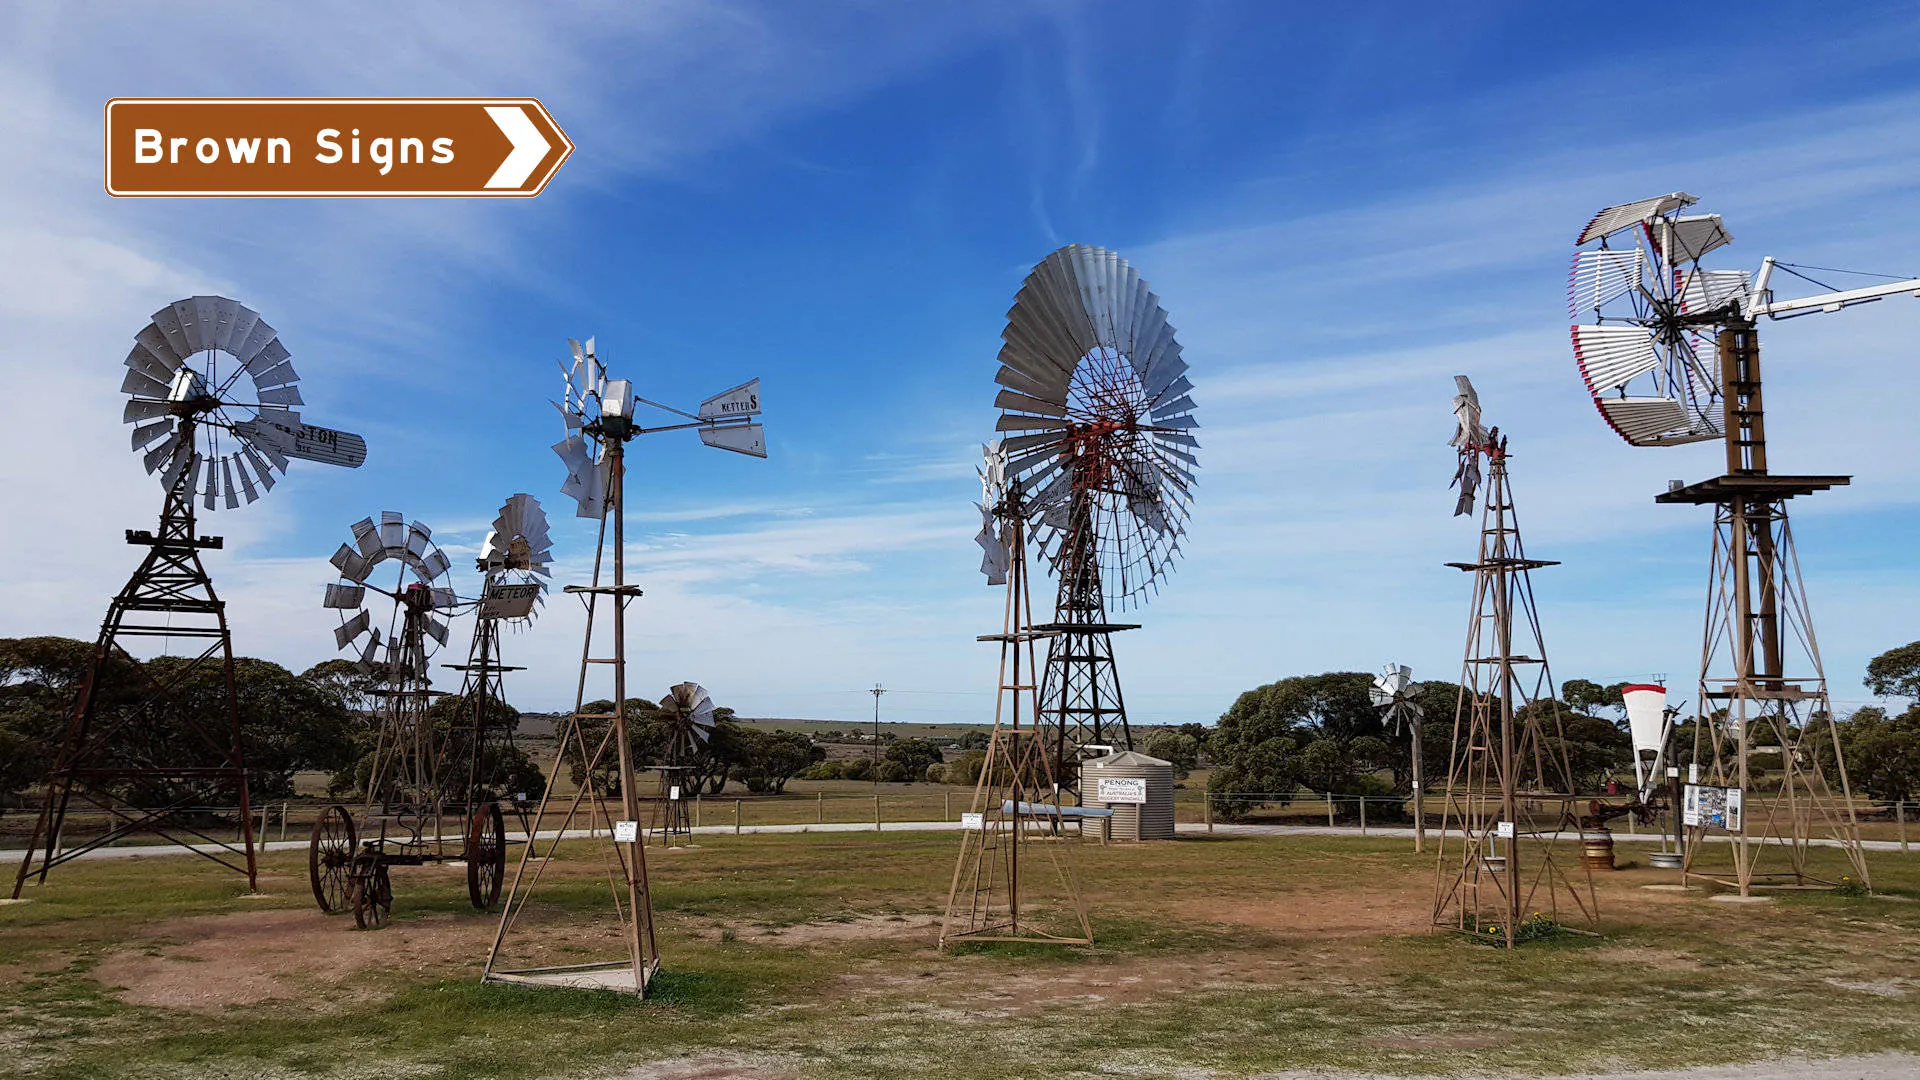 Collection of windmills at the Windmill Museum in Penong South Australia, including the Big Windmill, Australia's biggest windmill and one of the big things